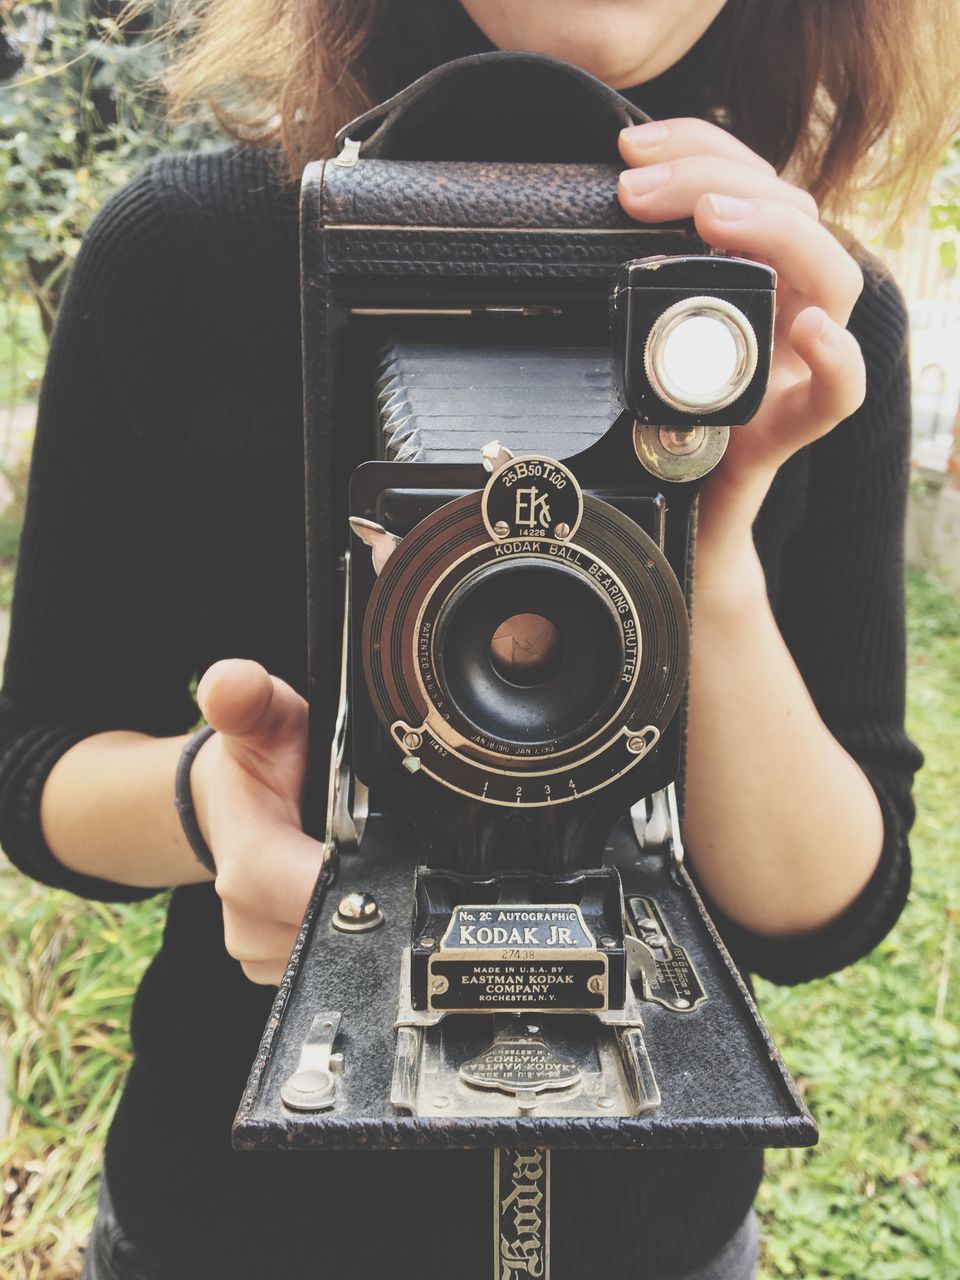 camera - photographic equipment, photography themes, one person, photographing, technology, real people, holding, photographic equipment, retro styled, leisure activity, camera, activity, lifestyles, occupation, photographer, front view, digital camera, adult, slr camera, antique